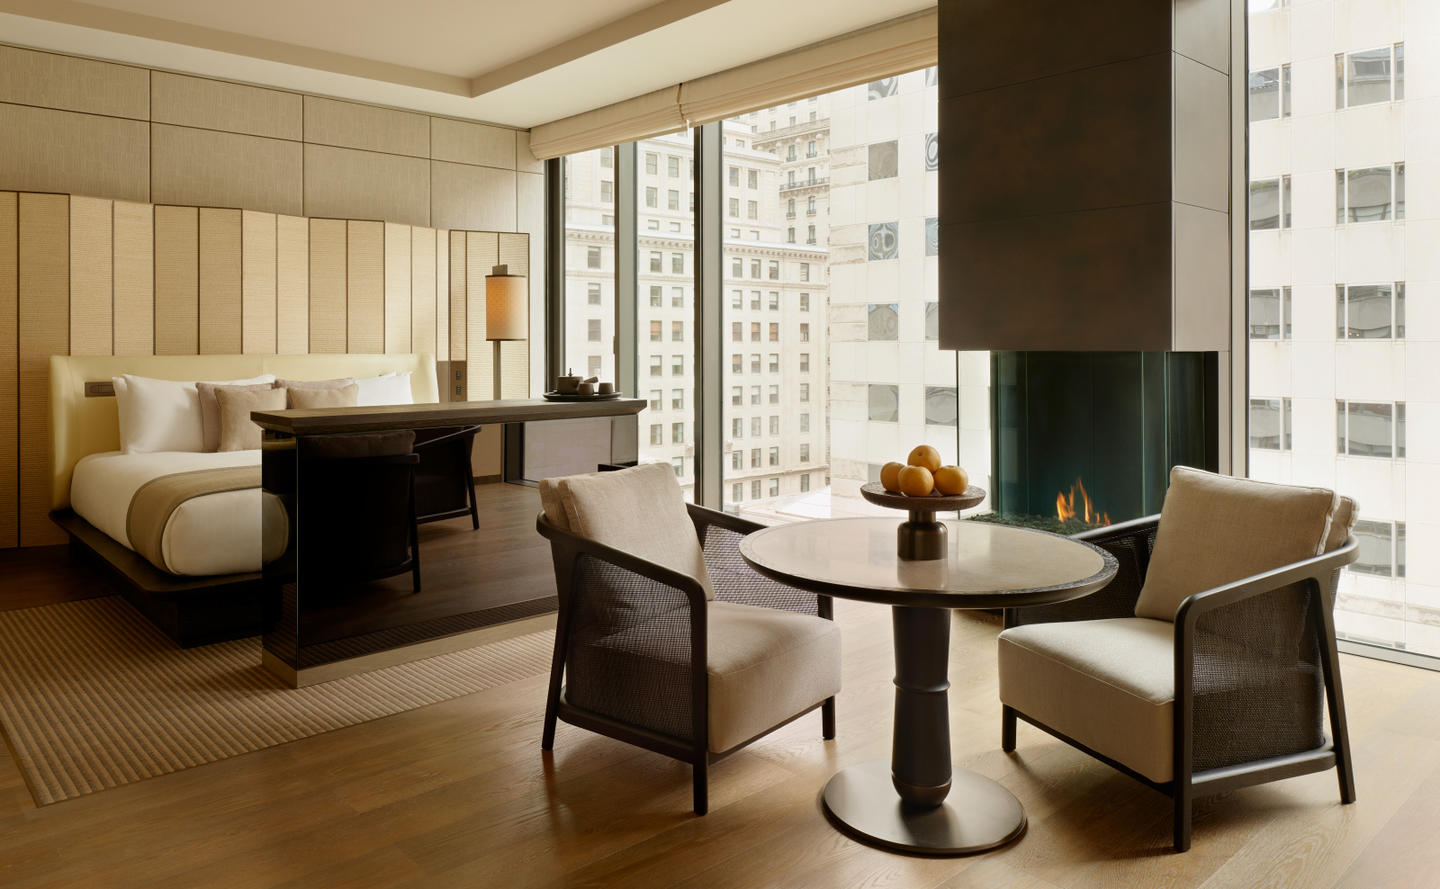 Aman New York, USA - Accommodation, Premier Suite 56th